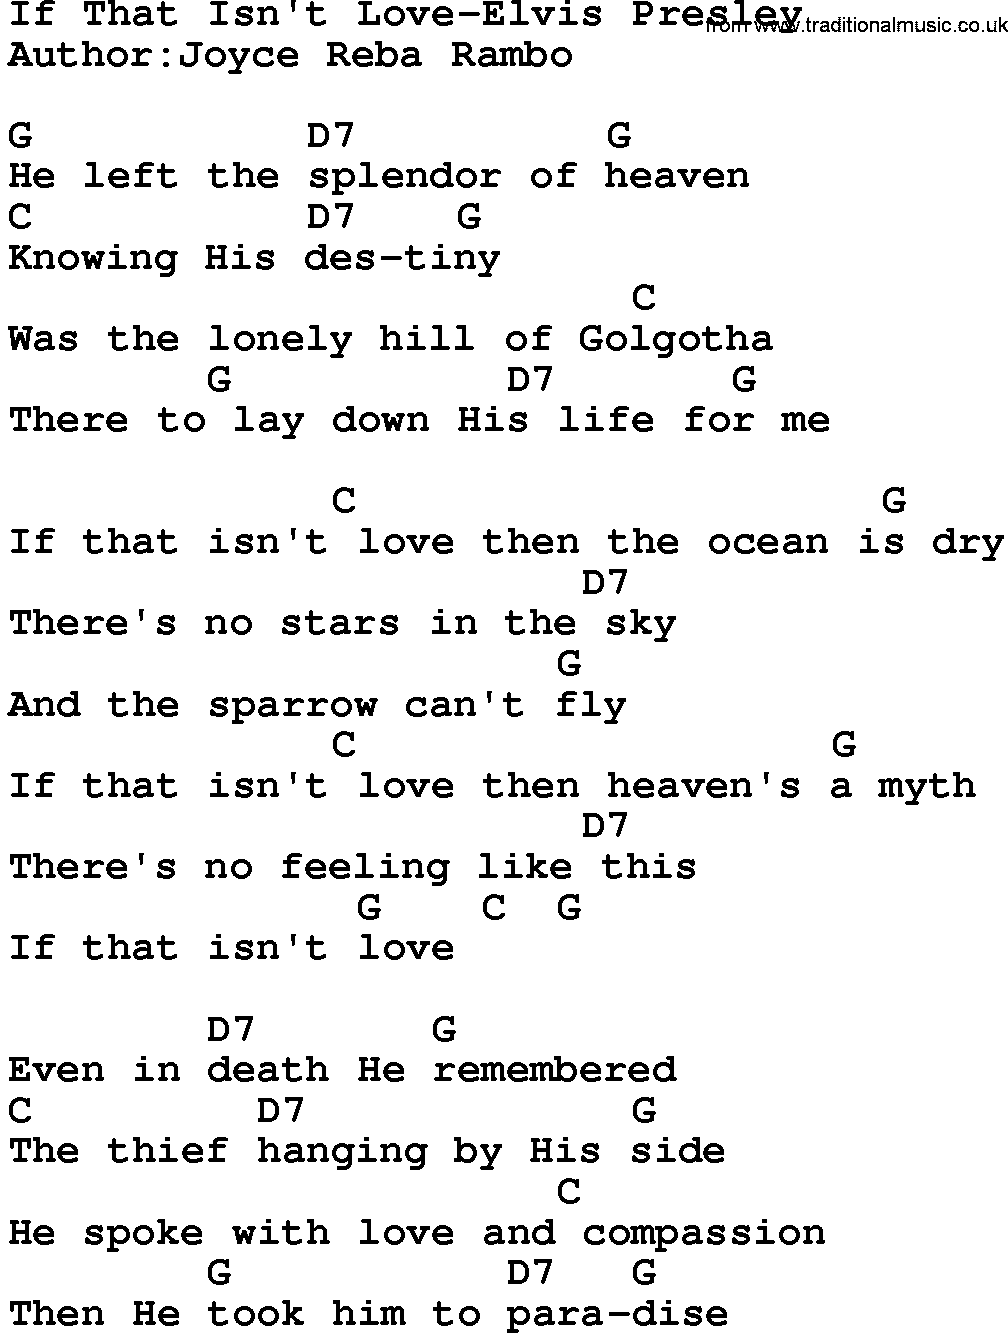 Country music song: If That Isn't Love-Elvis Presley lyrics and chords